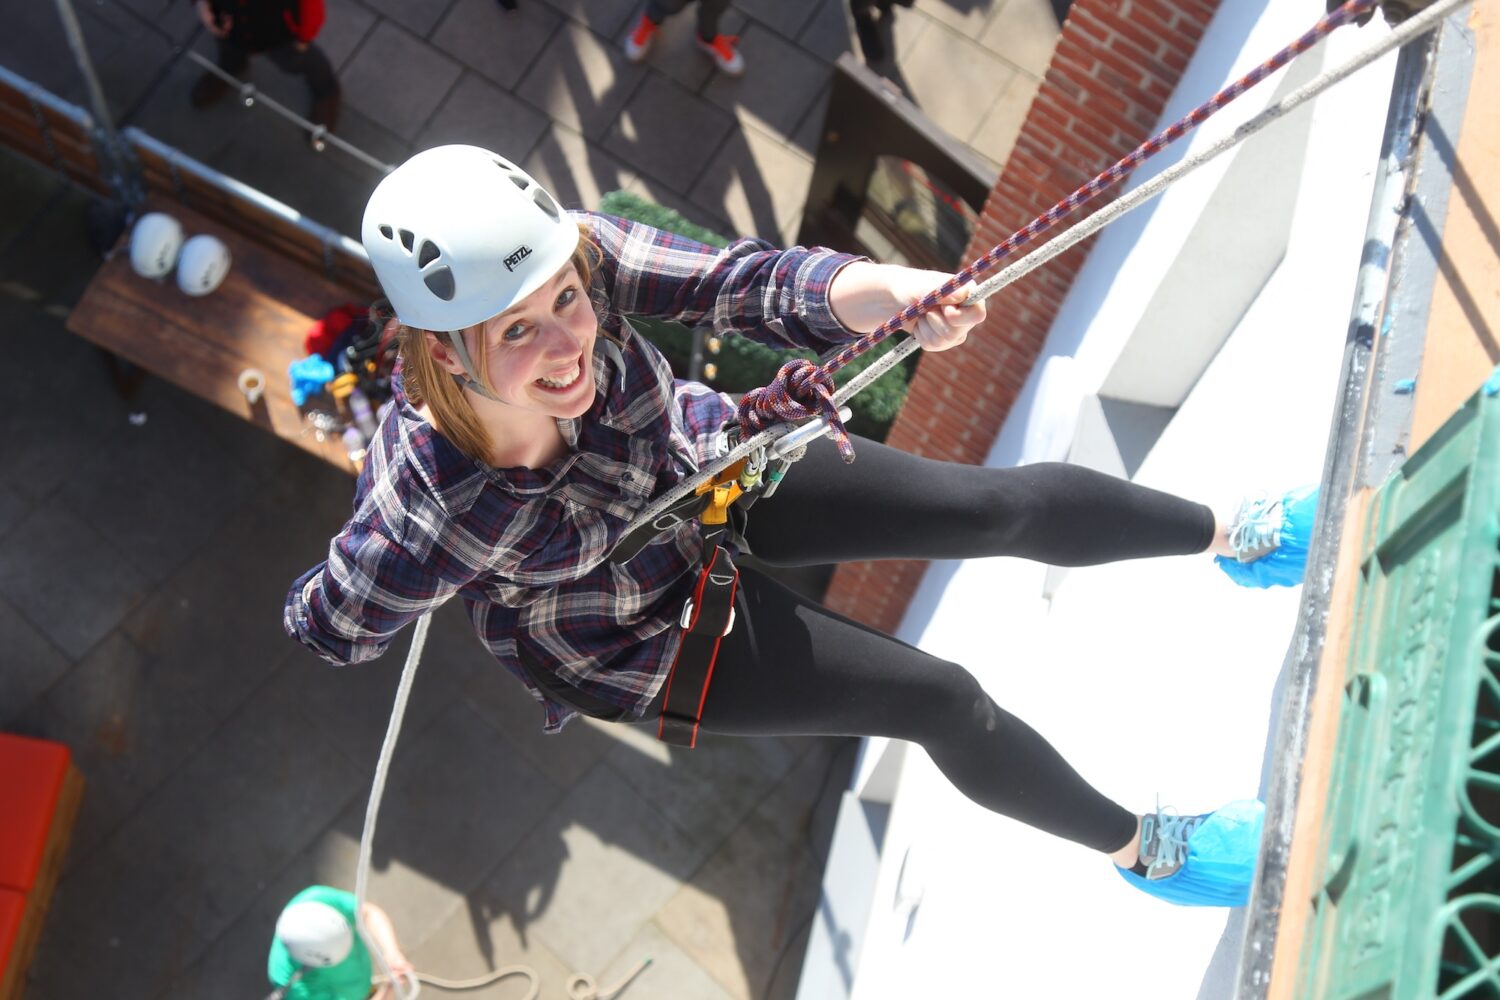 WHAT’S ON? | Abseil down The Beefy Boys in Hereford in March and raise money for St Michael’s Hospice